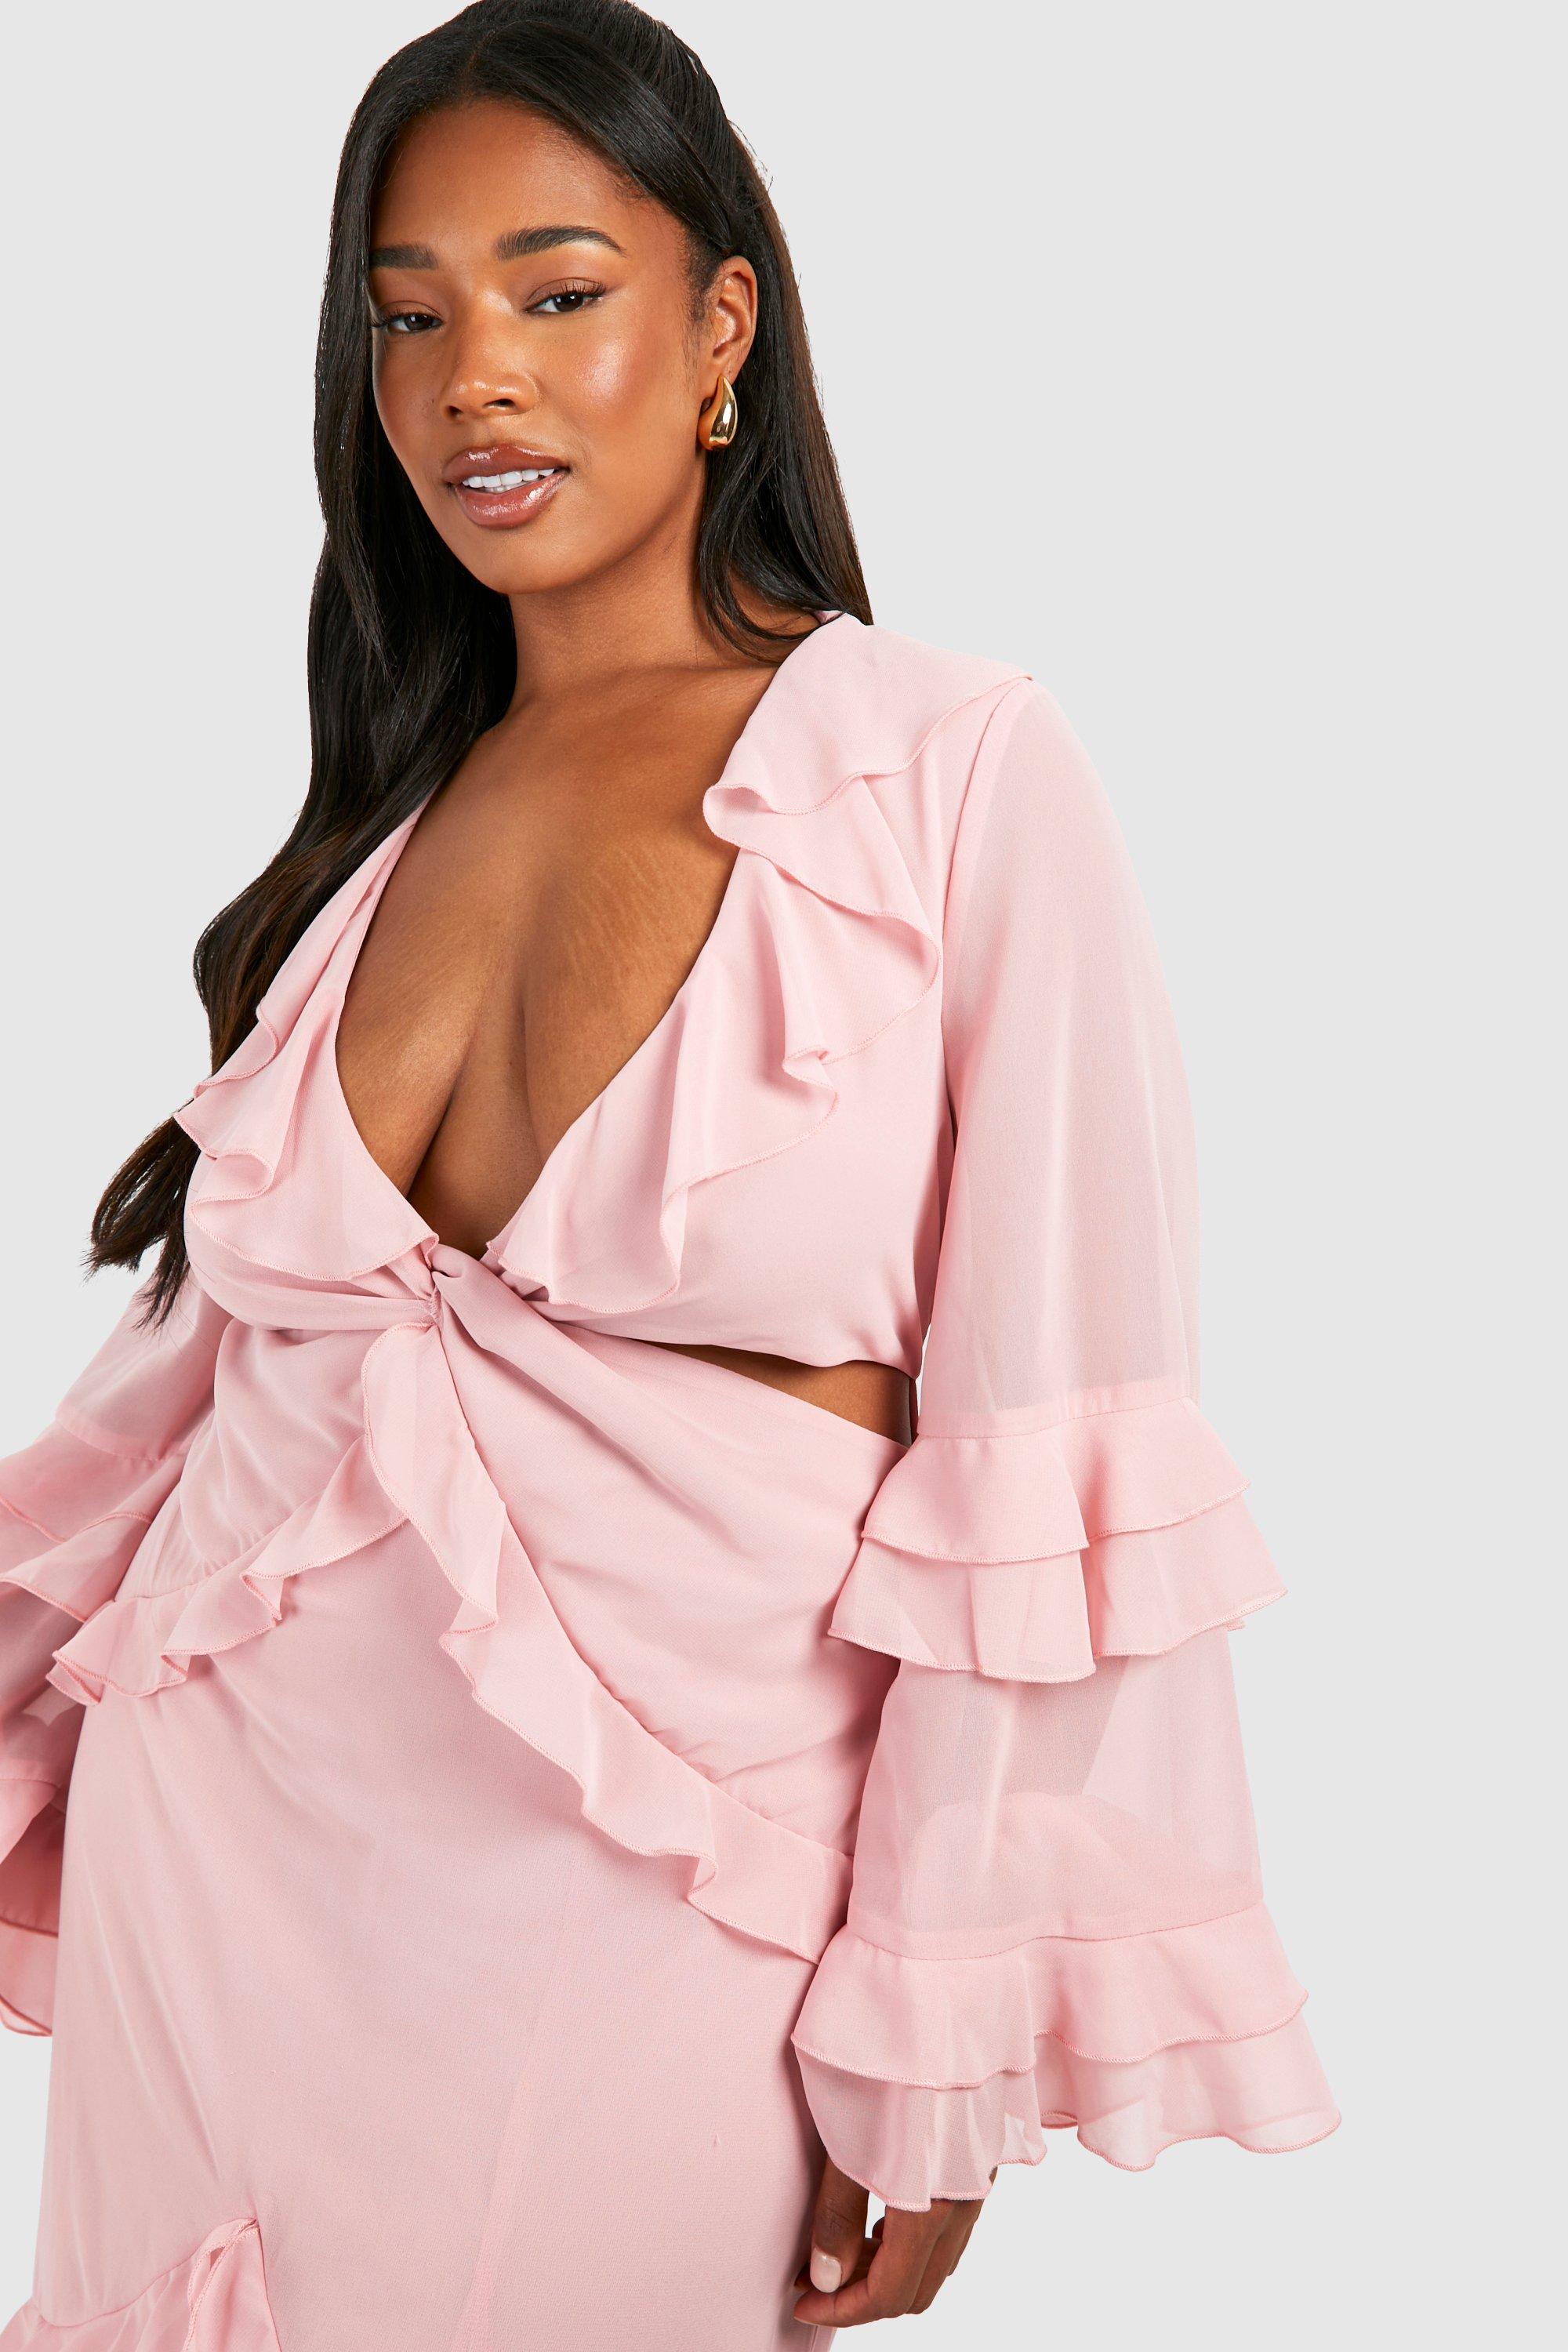 PINK RUFFLE DRESS WITH FRONT SLIT